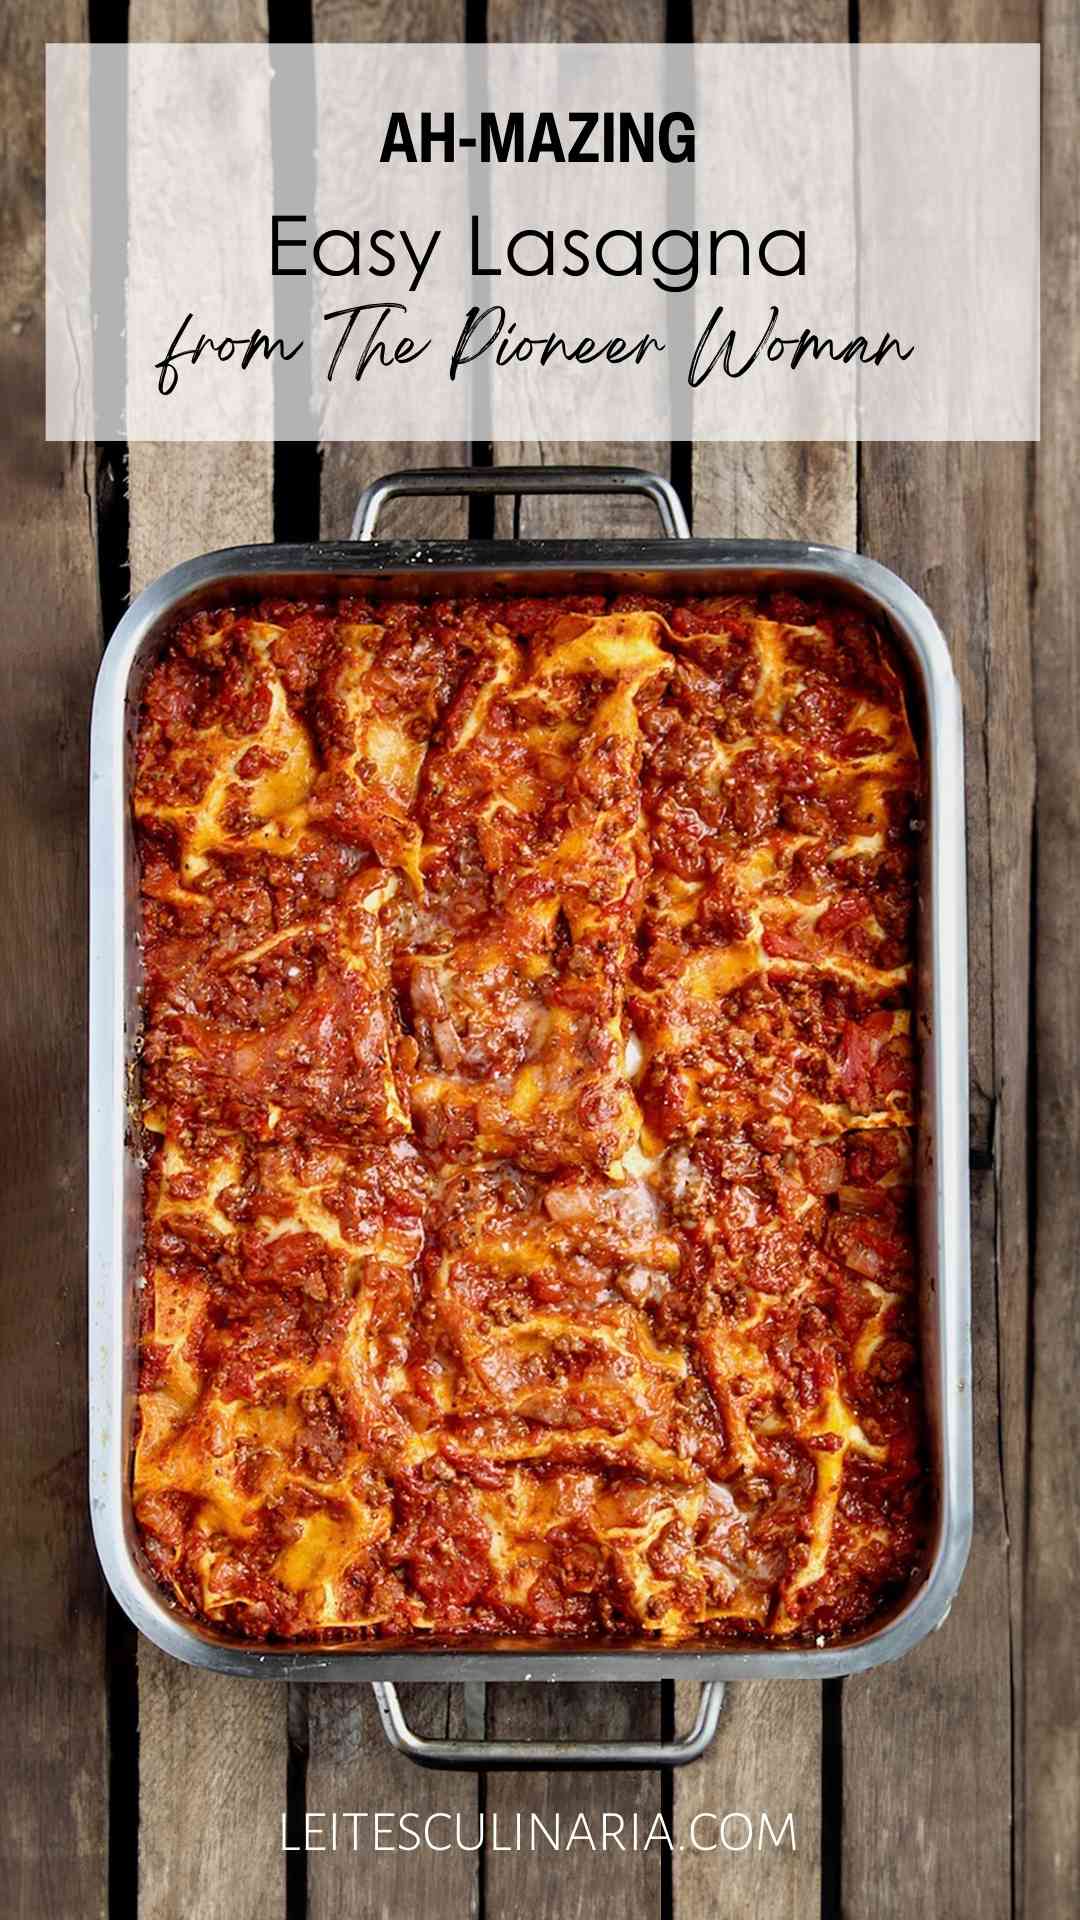 A metal baking dish filled with the Pioneer Woman's favorite lasagna on a wooden table.